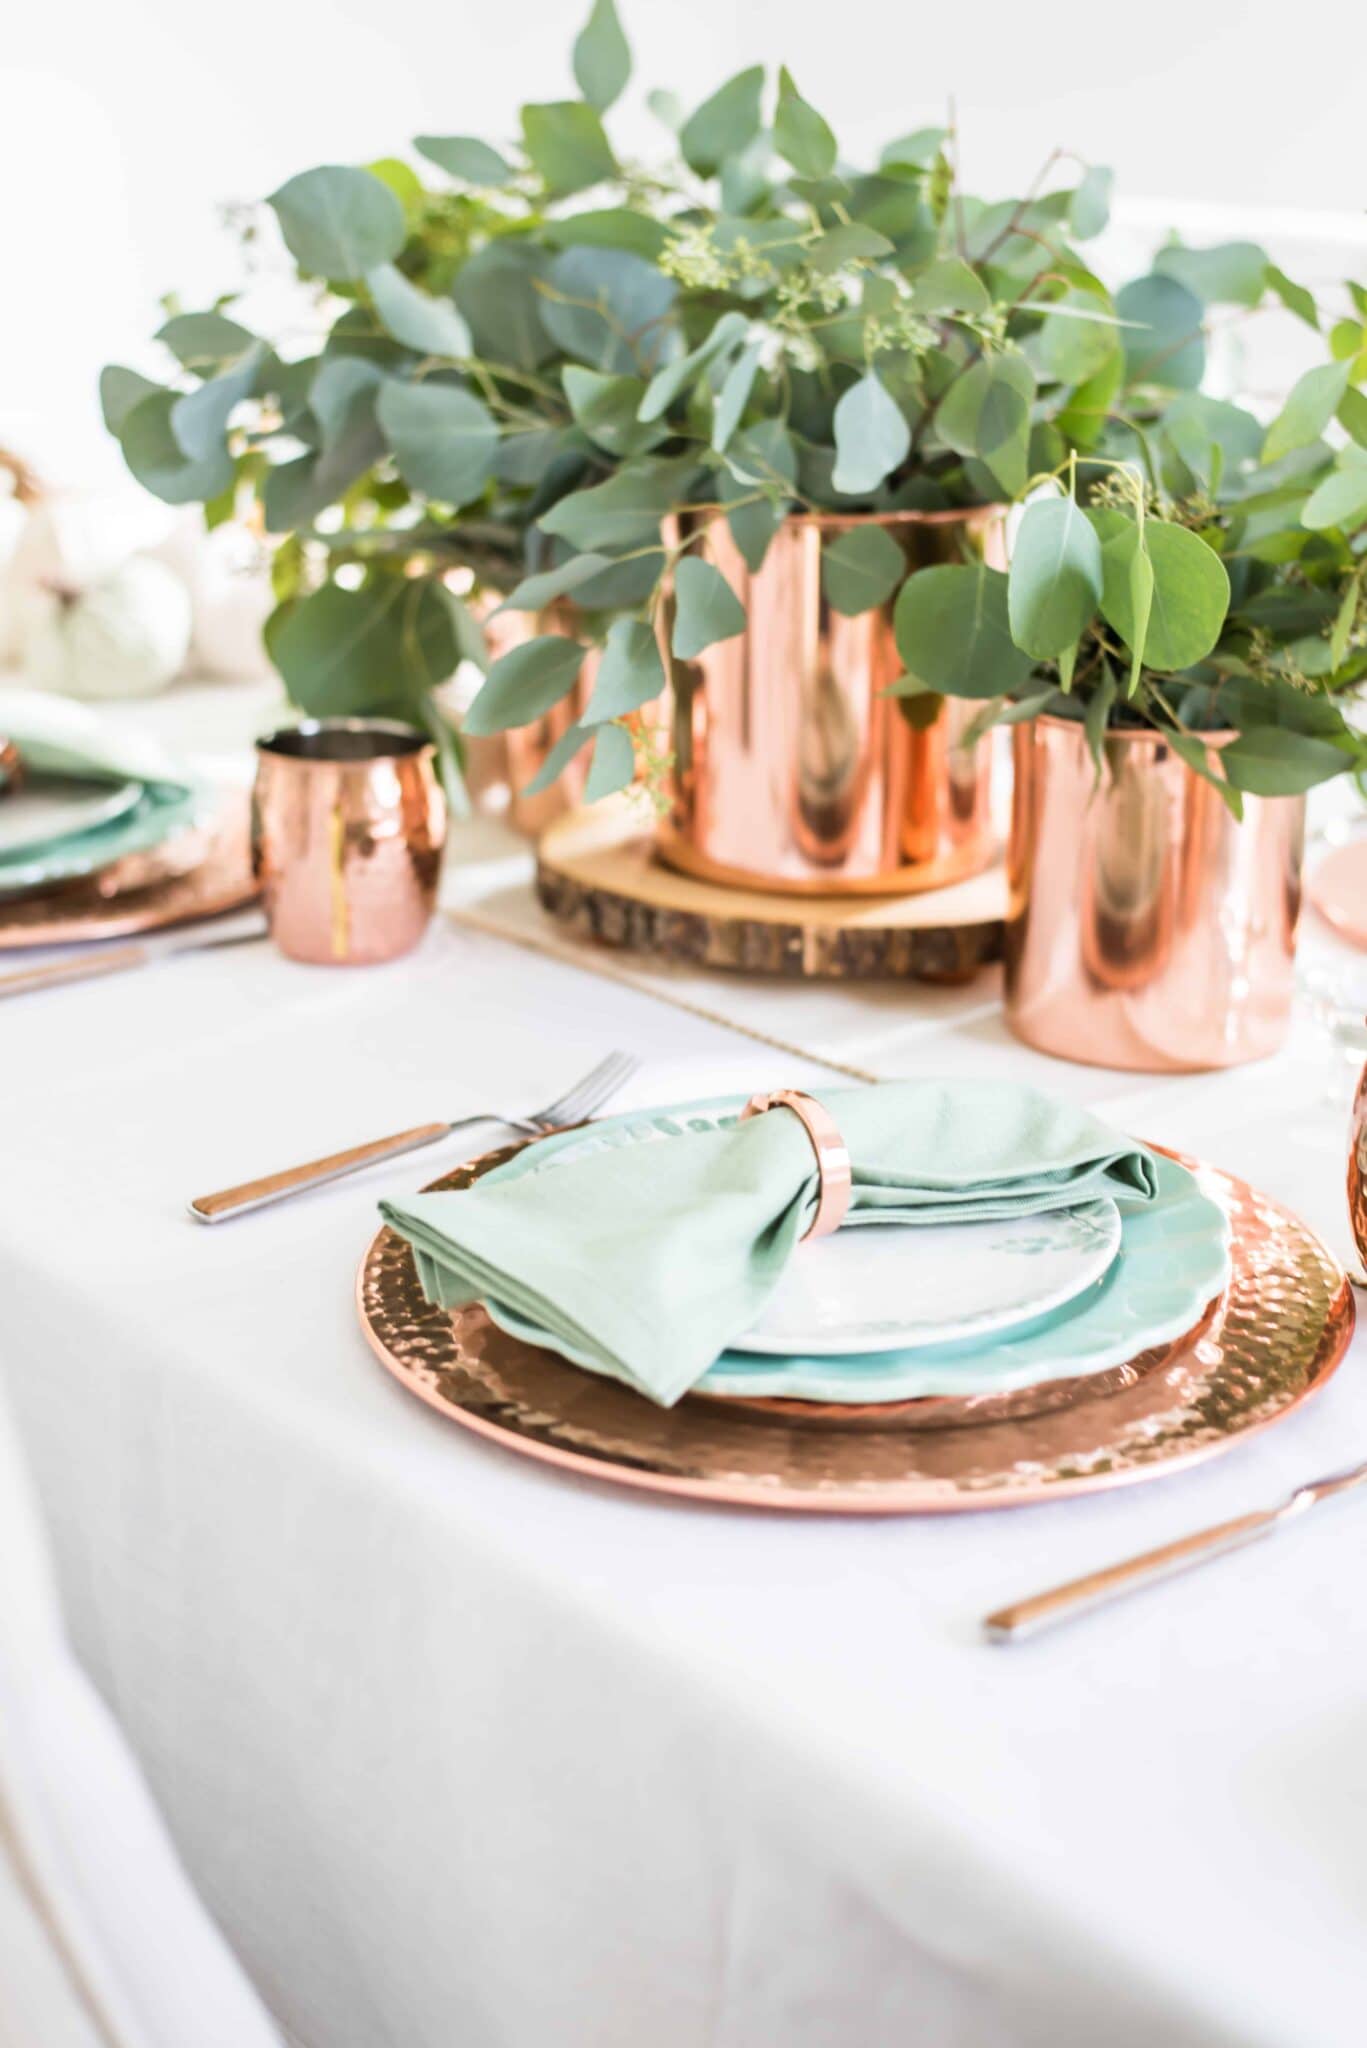 Simple Coastal-Inspired Summer Tablescape | Jenna Kate at Home